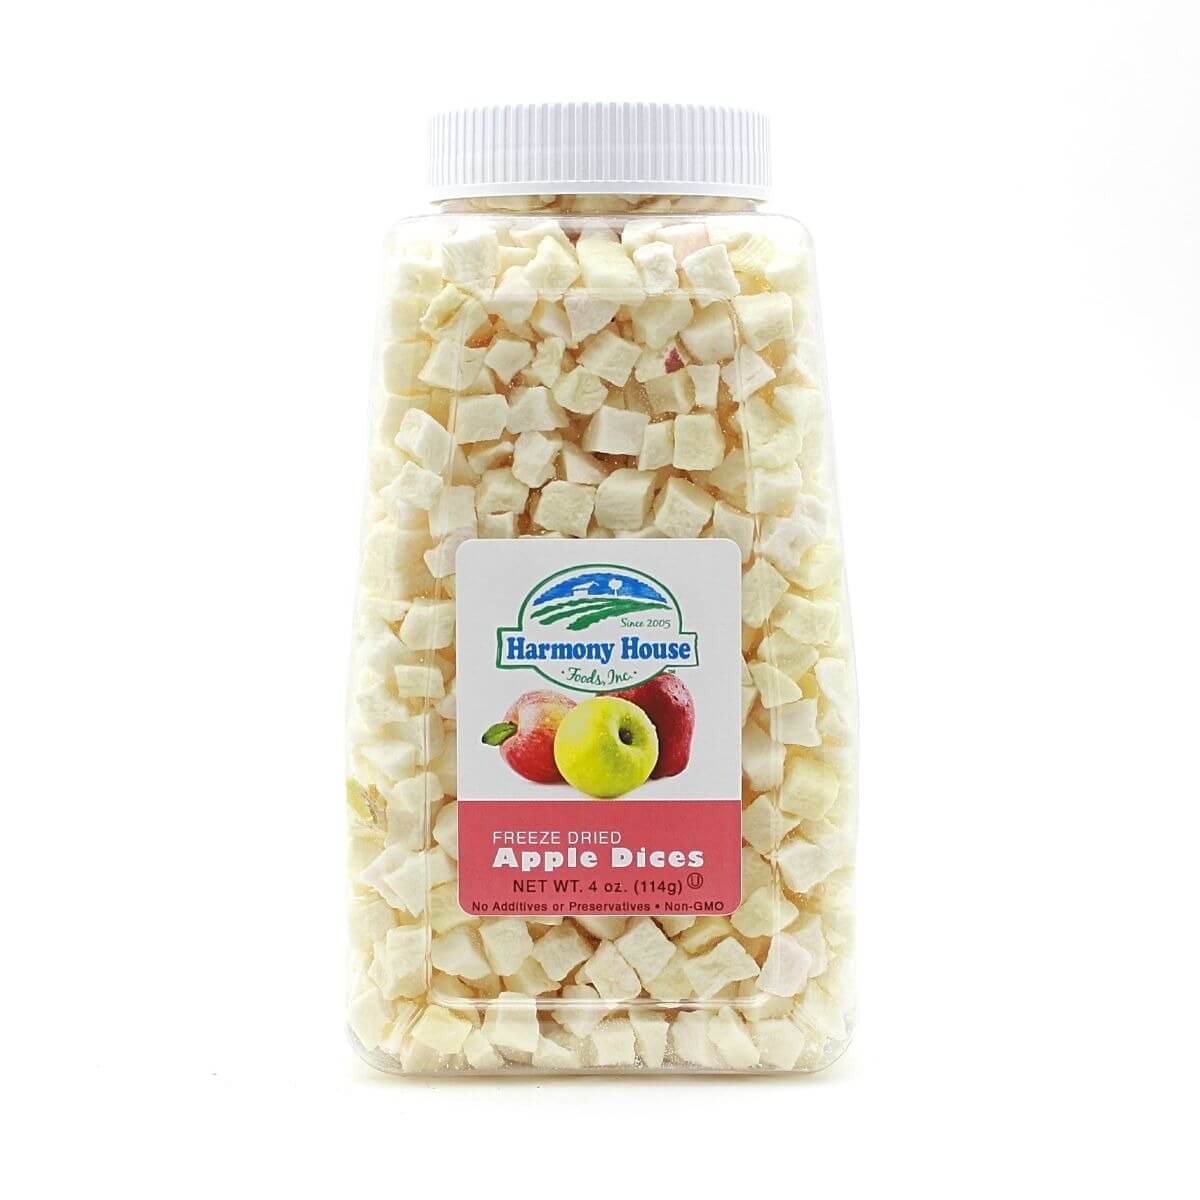 A jar of Harmony House Freeze-Dried Apple Dices on a white background.